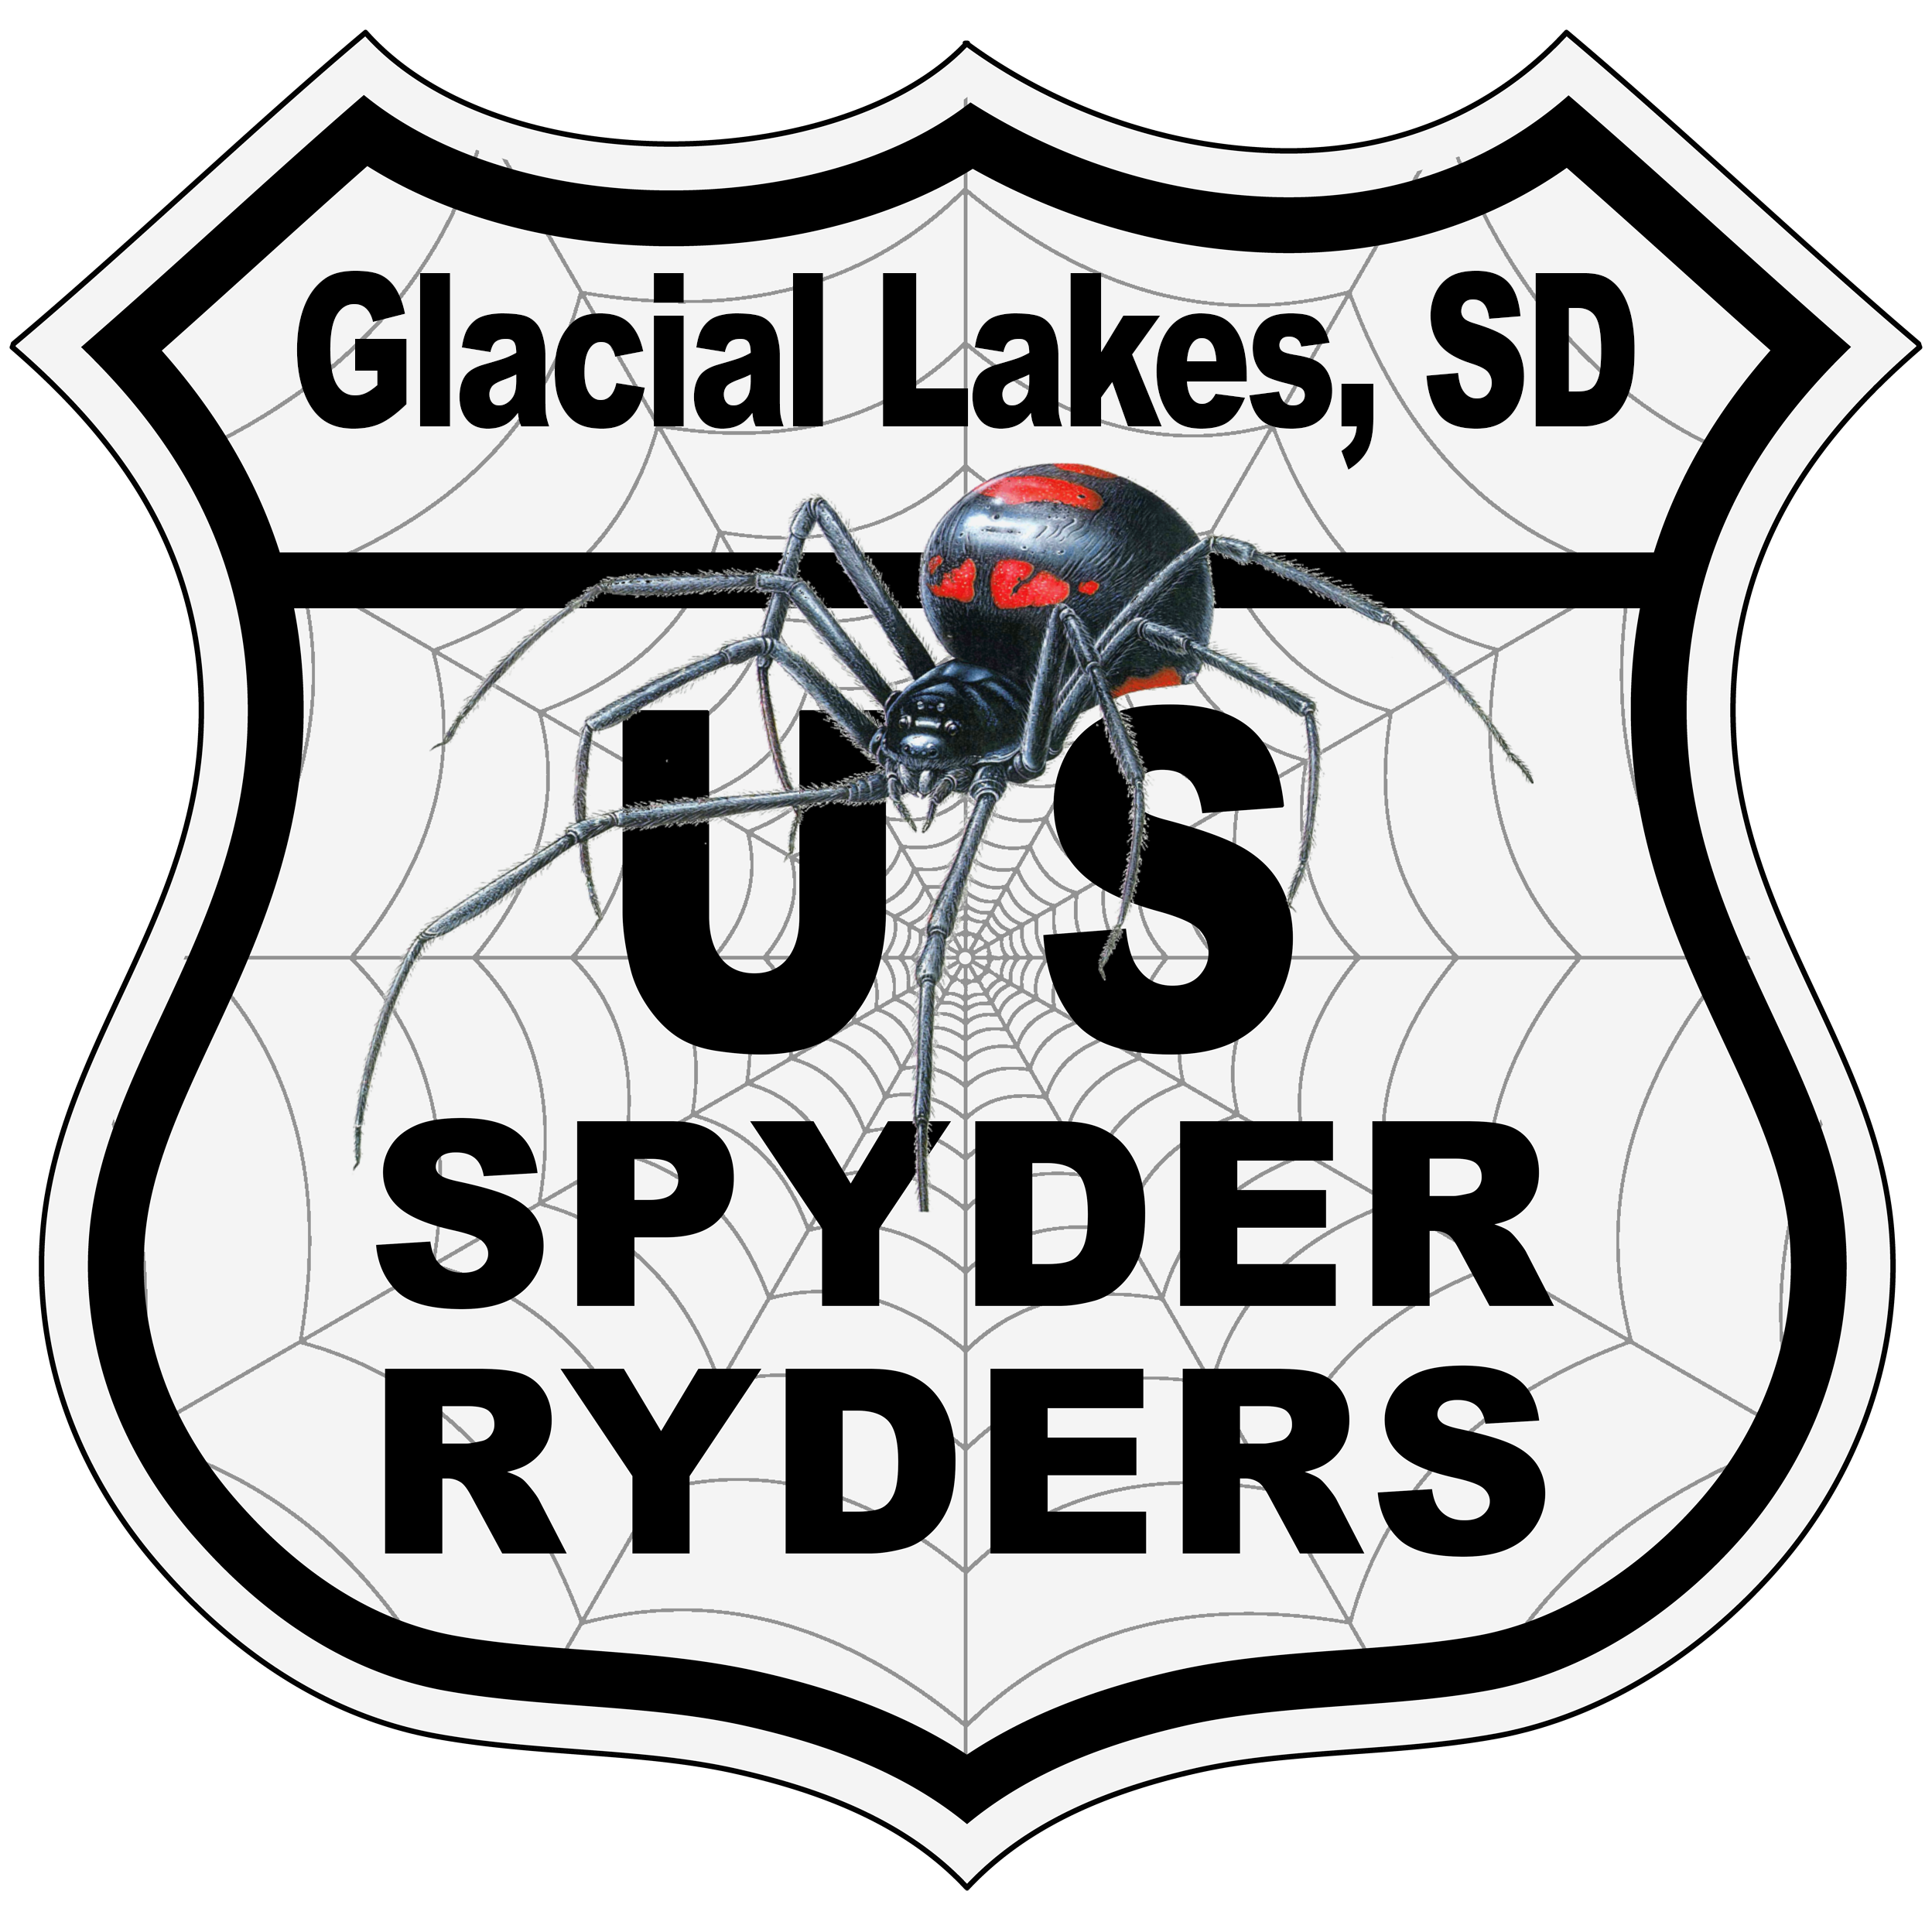 US_Spyder_Ryder_SD_Glacial Lakes.png